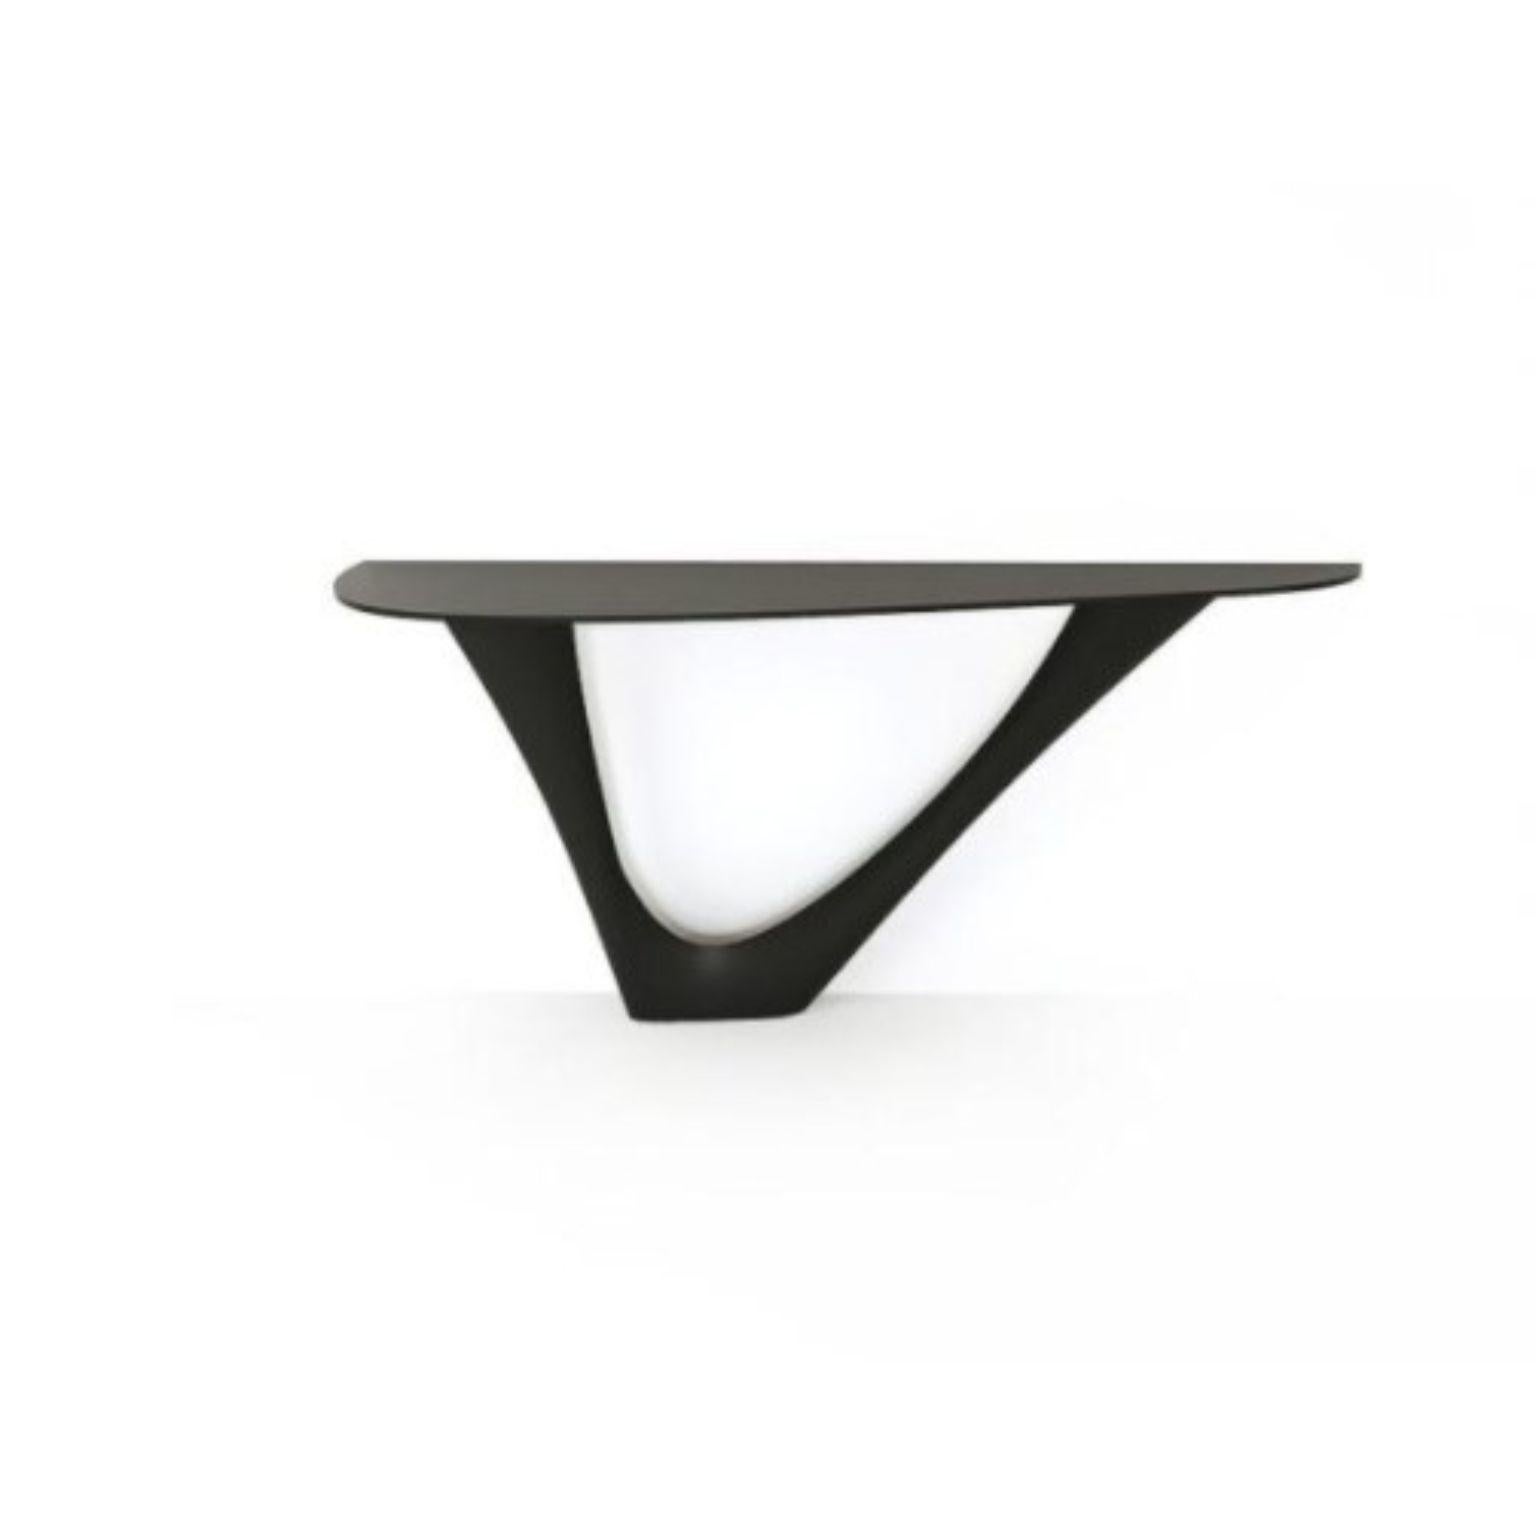 Beige Grey G-Console steel base with steel top mono by Zieta
Dimensions: D 43 x W 159 x H 75 cm 
Material: Steel top. Stainless steel. 
Also available in differetn colours and different dimensions.

G-Console is another bionic object in our